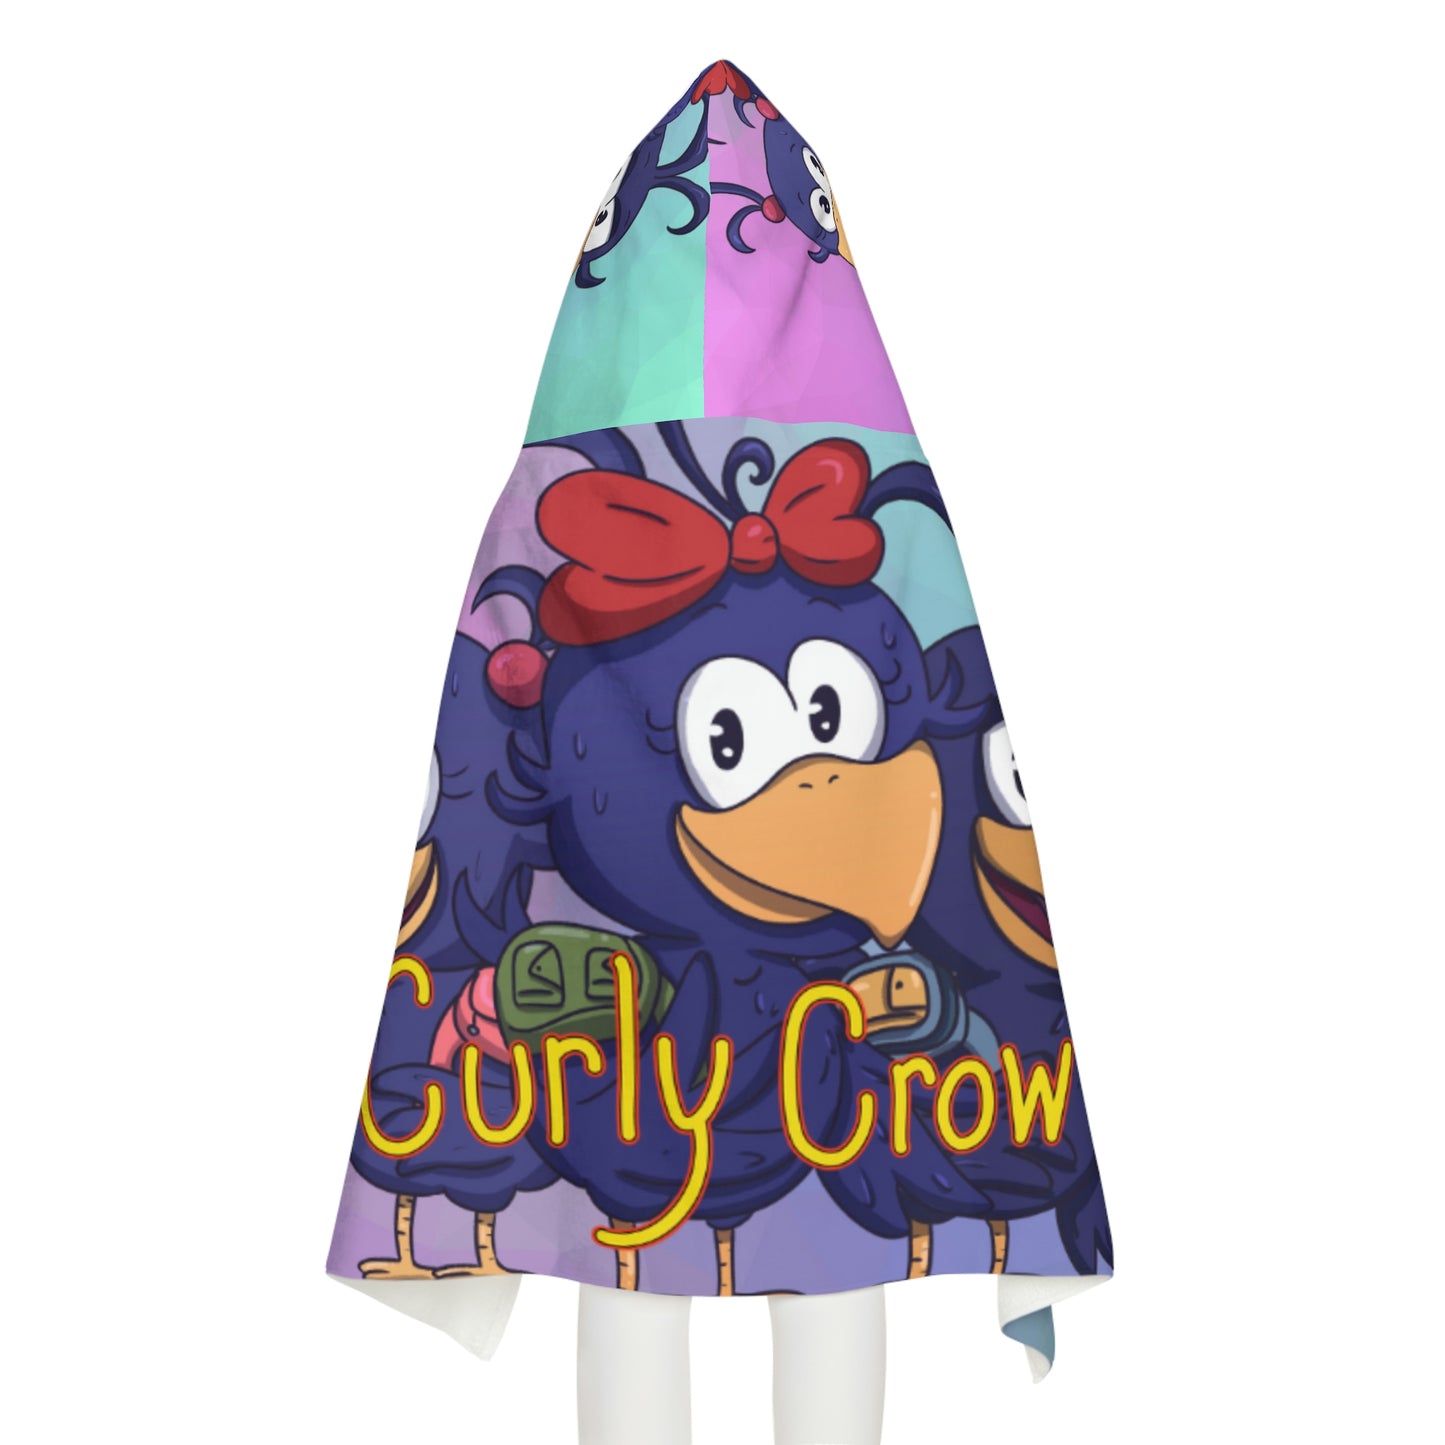 Curly Crow Hooded Towel